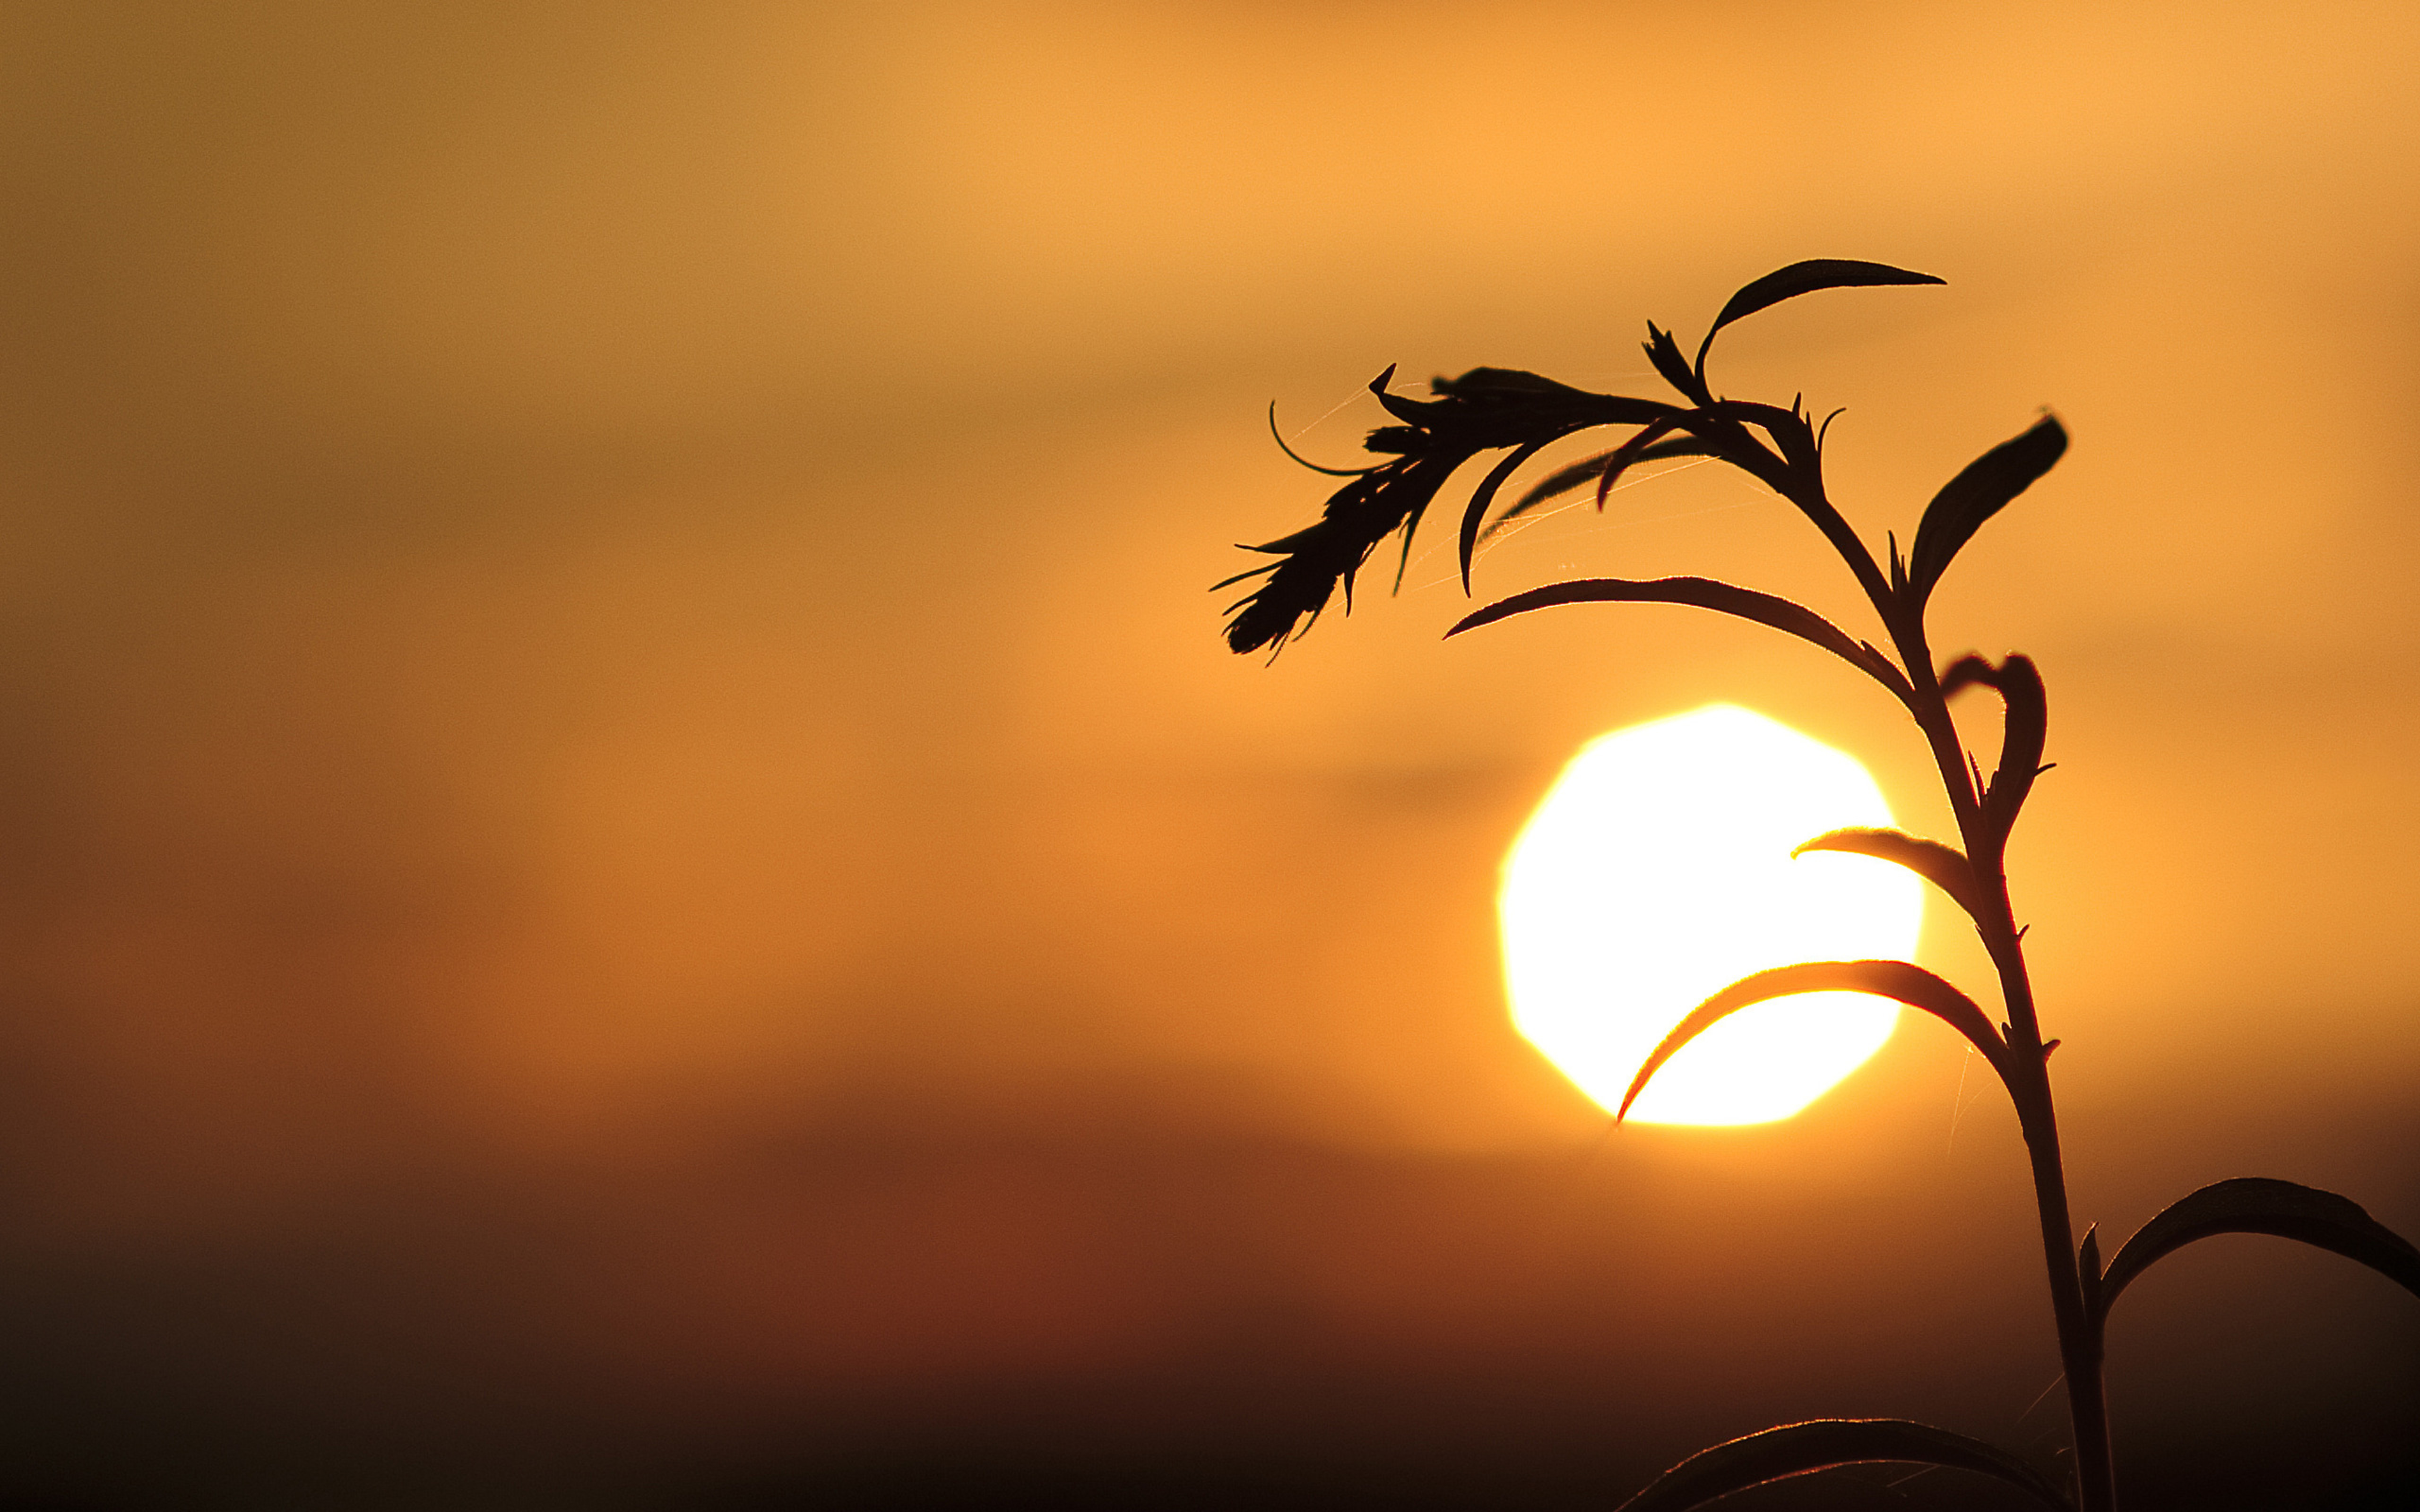 Wallpaper Download 5120x3200 Shadow of a plant in the sunset ...